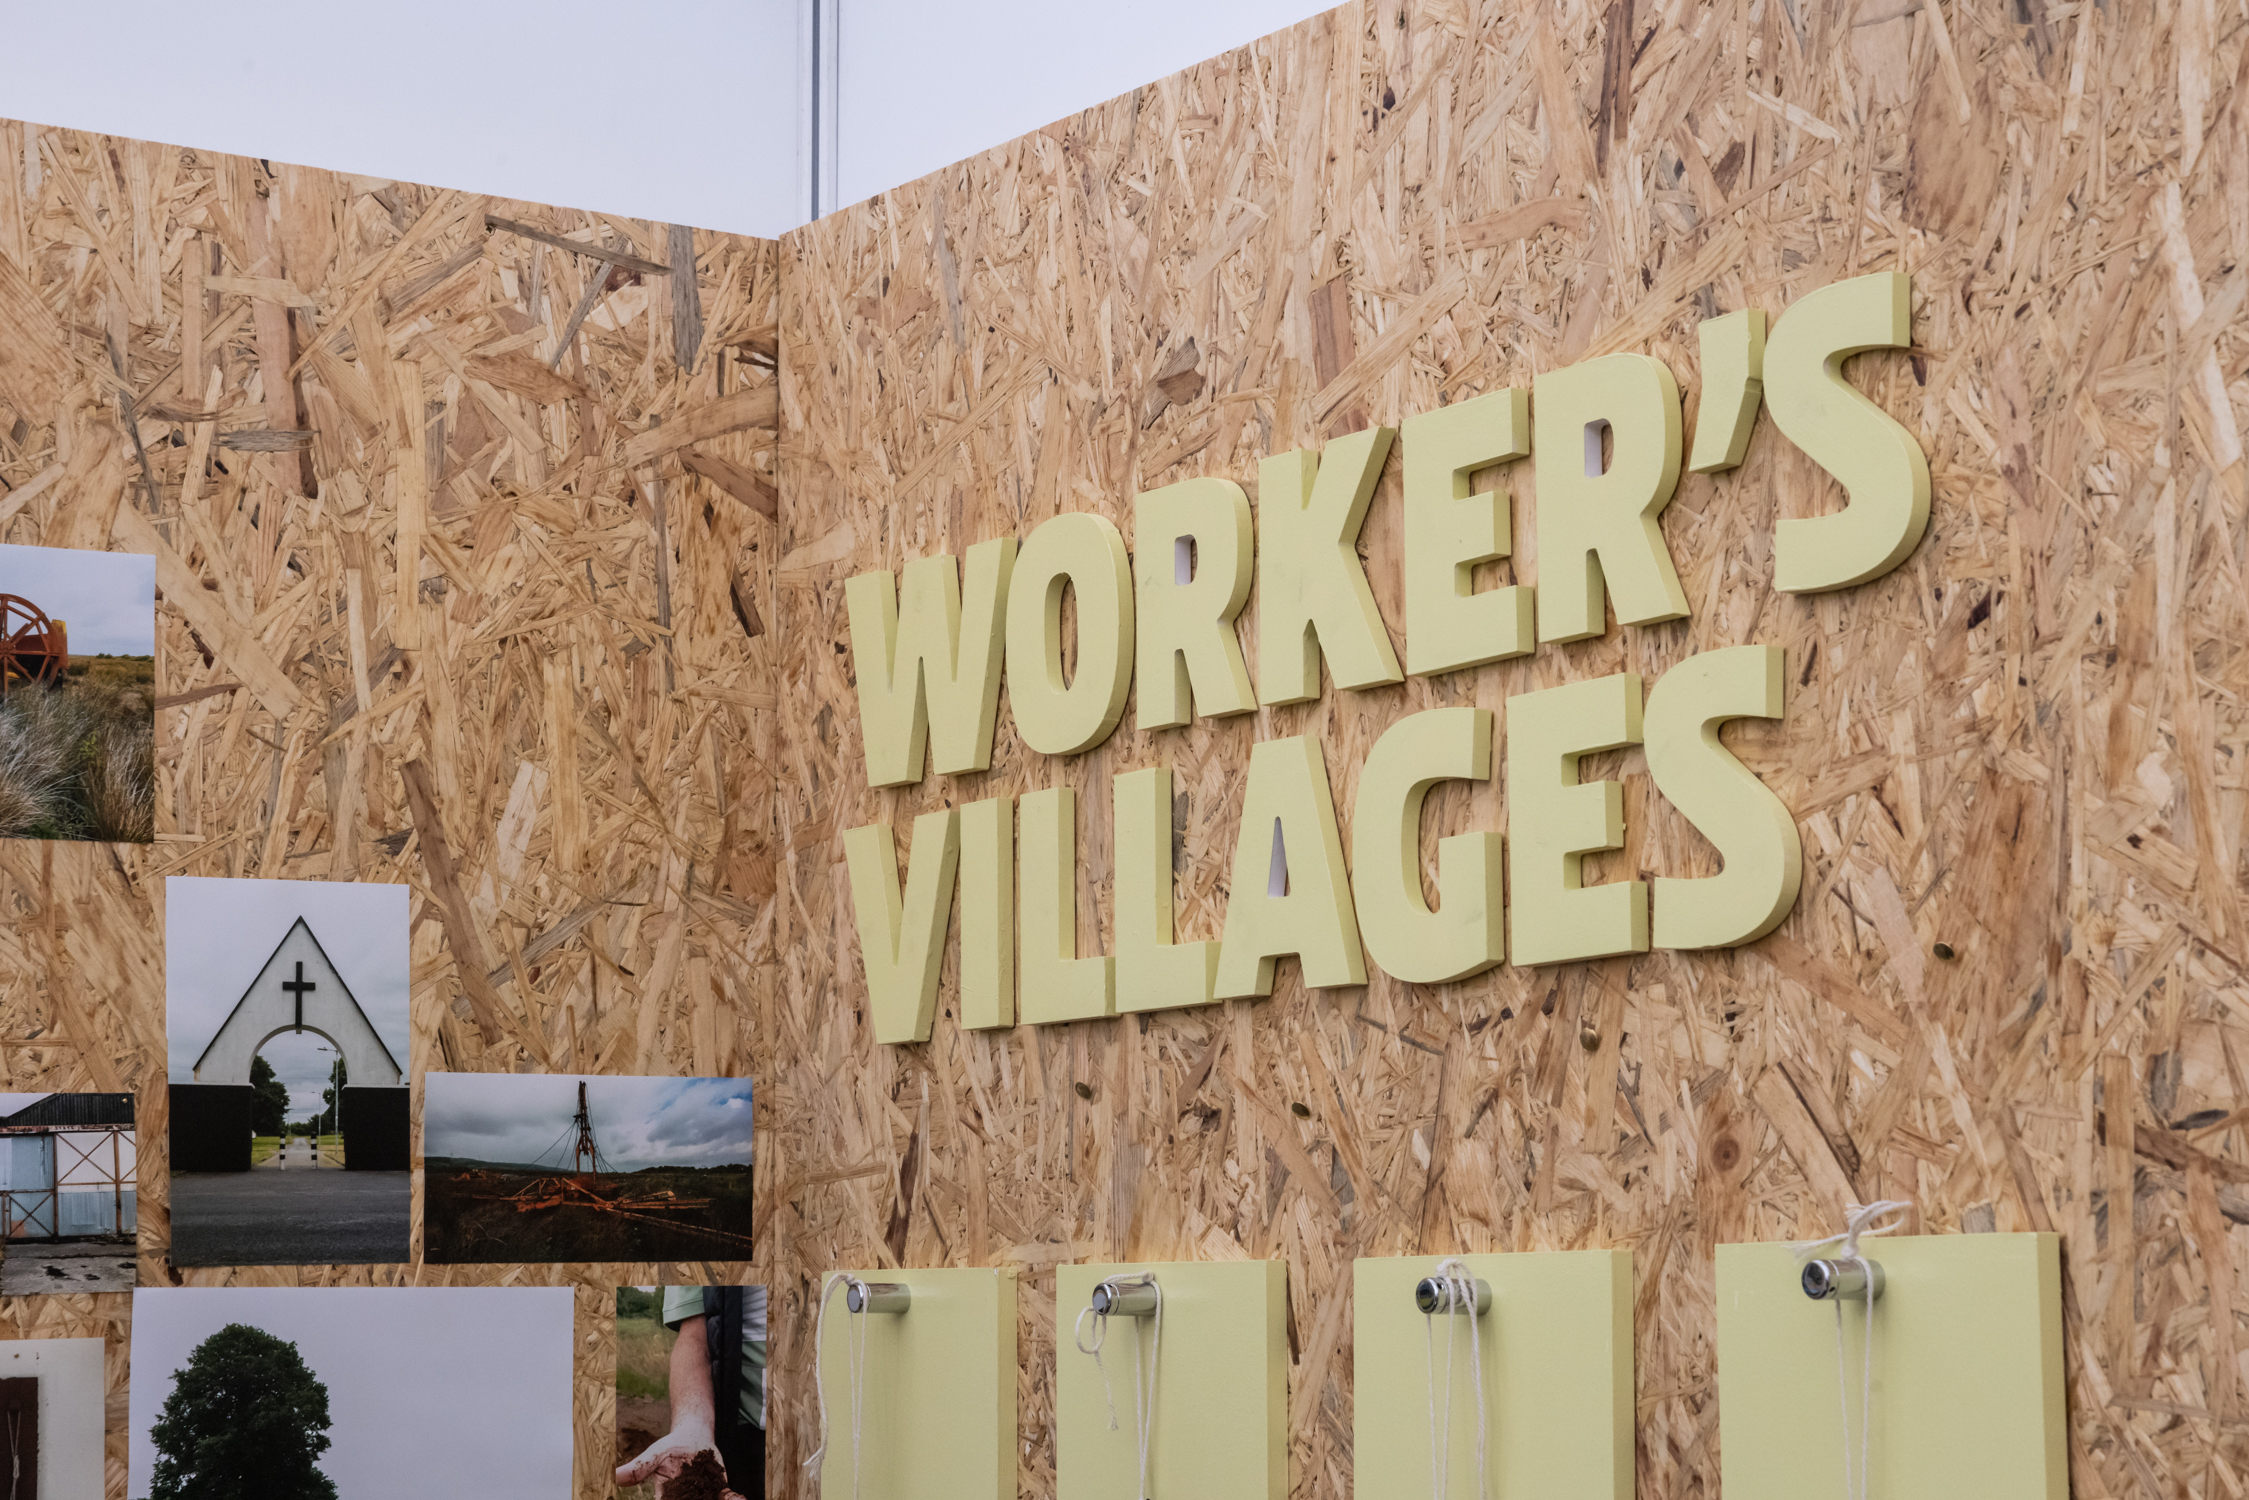 Colloquium Open Call: Workers’ Villages, What Next?